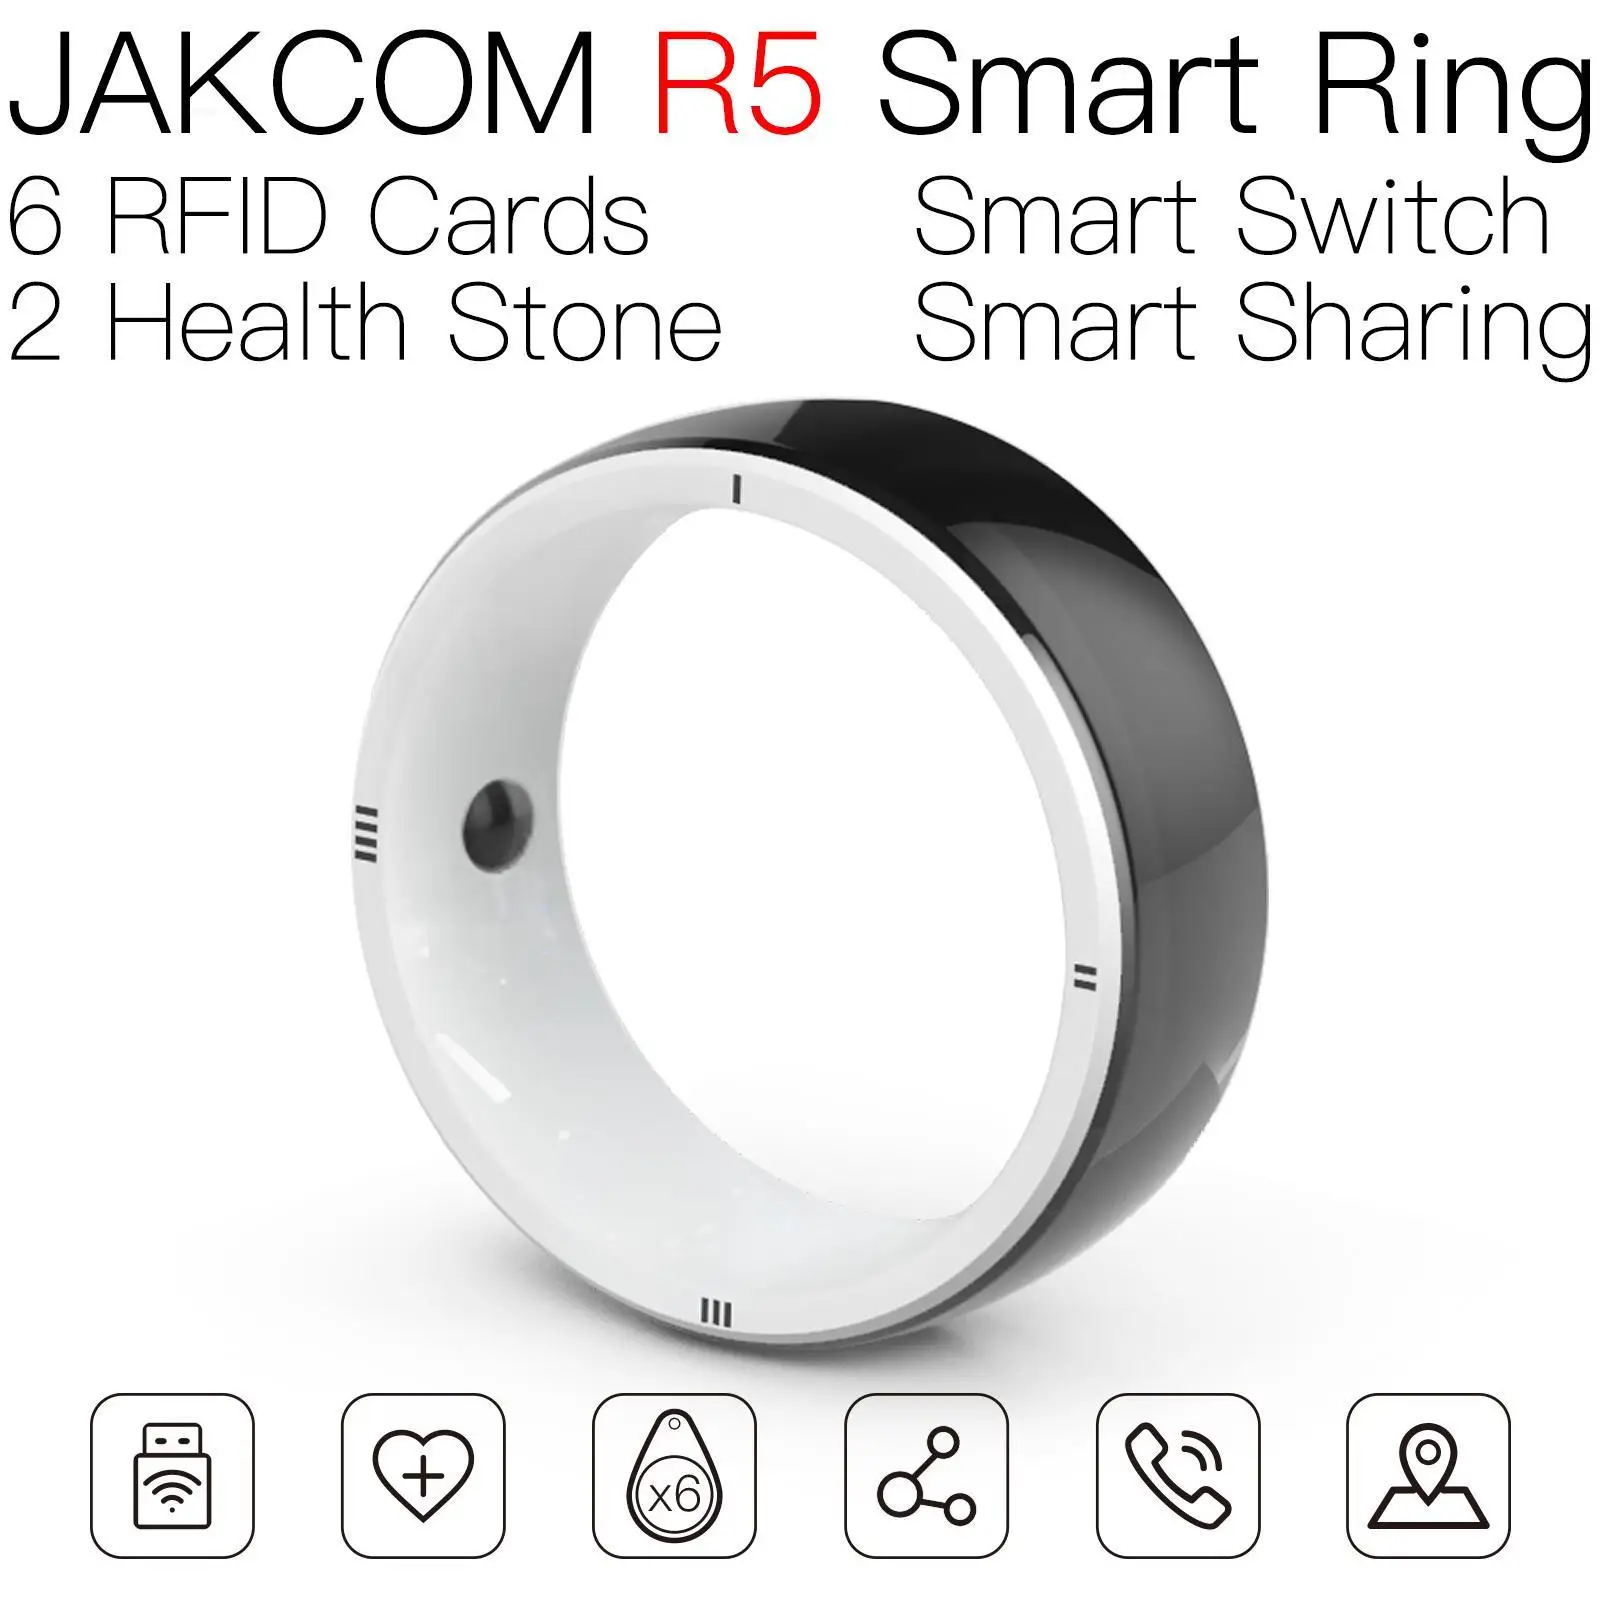 

JAKCOM R5 Smart Ring New arrival as asic tag ear aln 9654 rfid implant 125khz signature nfc 2 rupes items free shipping